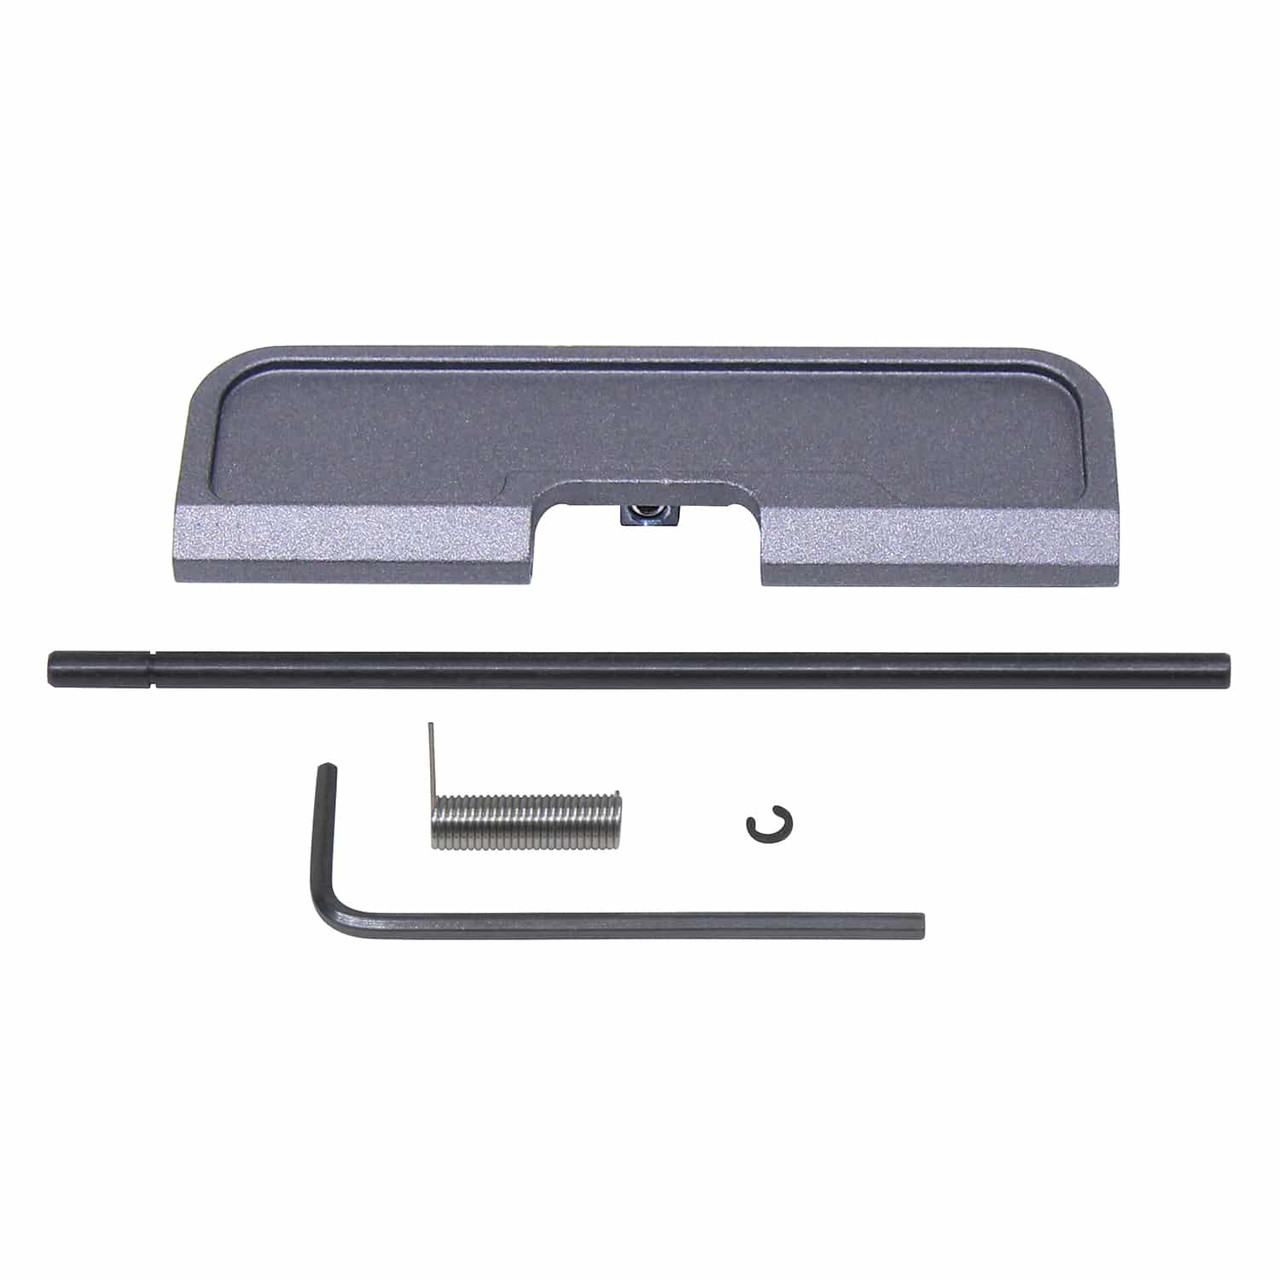 Guntec USA 223GATE-G3-TGS Ejection Port Dust Cover Assembly (Gen 3) (Tungsten)